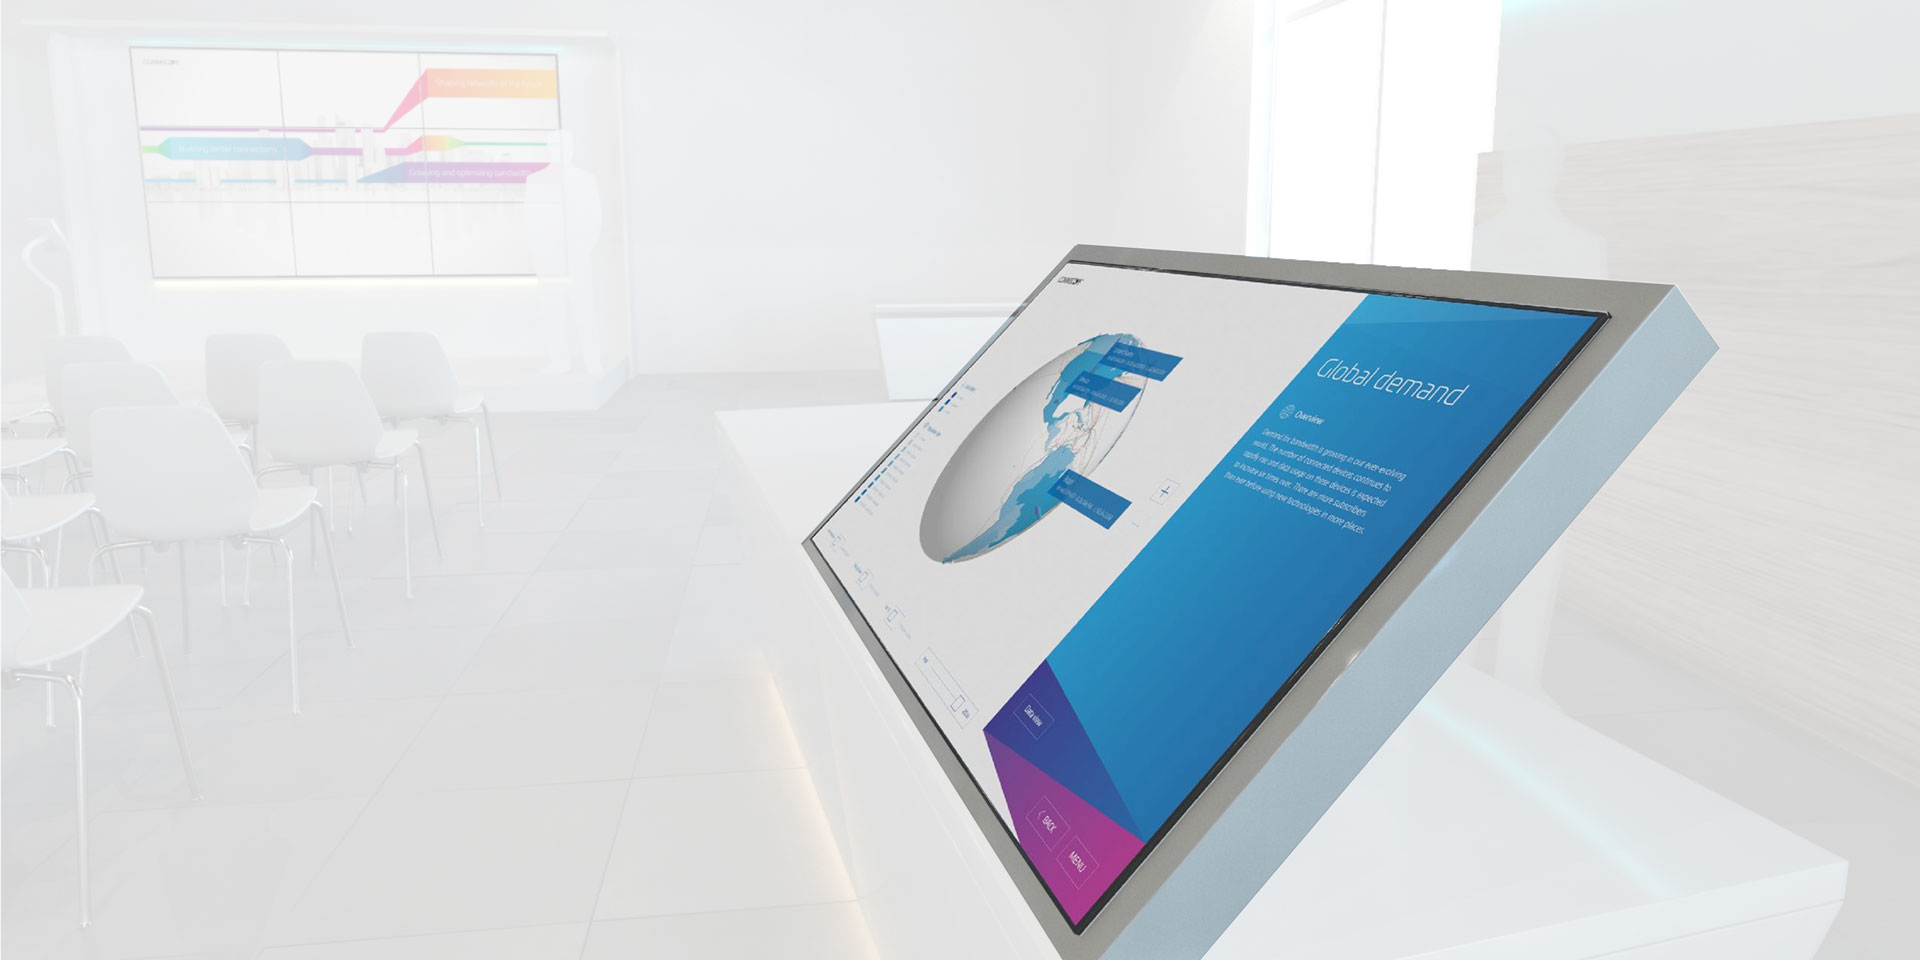 Interactive kiosks with a screen that uses PresentationOS to provide users with in-depth insight into the CommScope brand, products, and benefits.